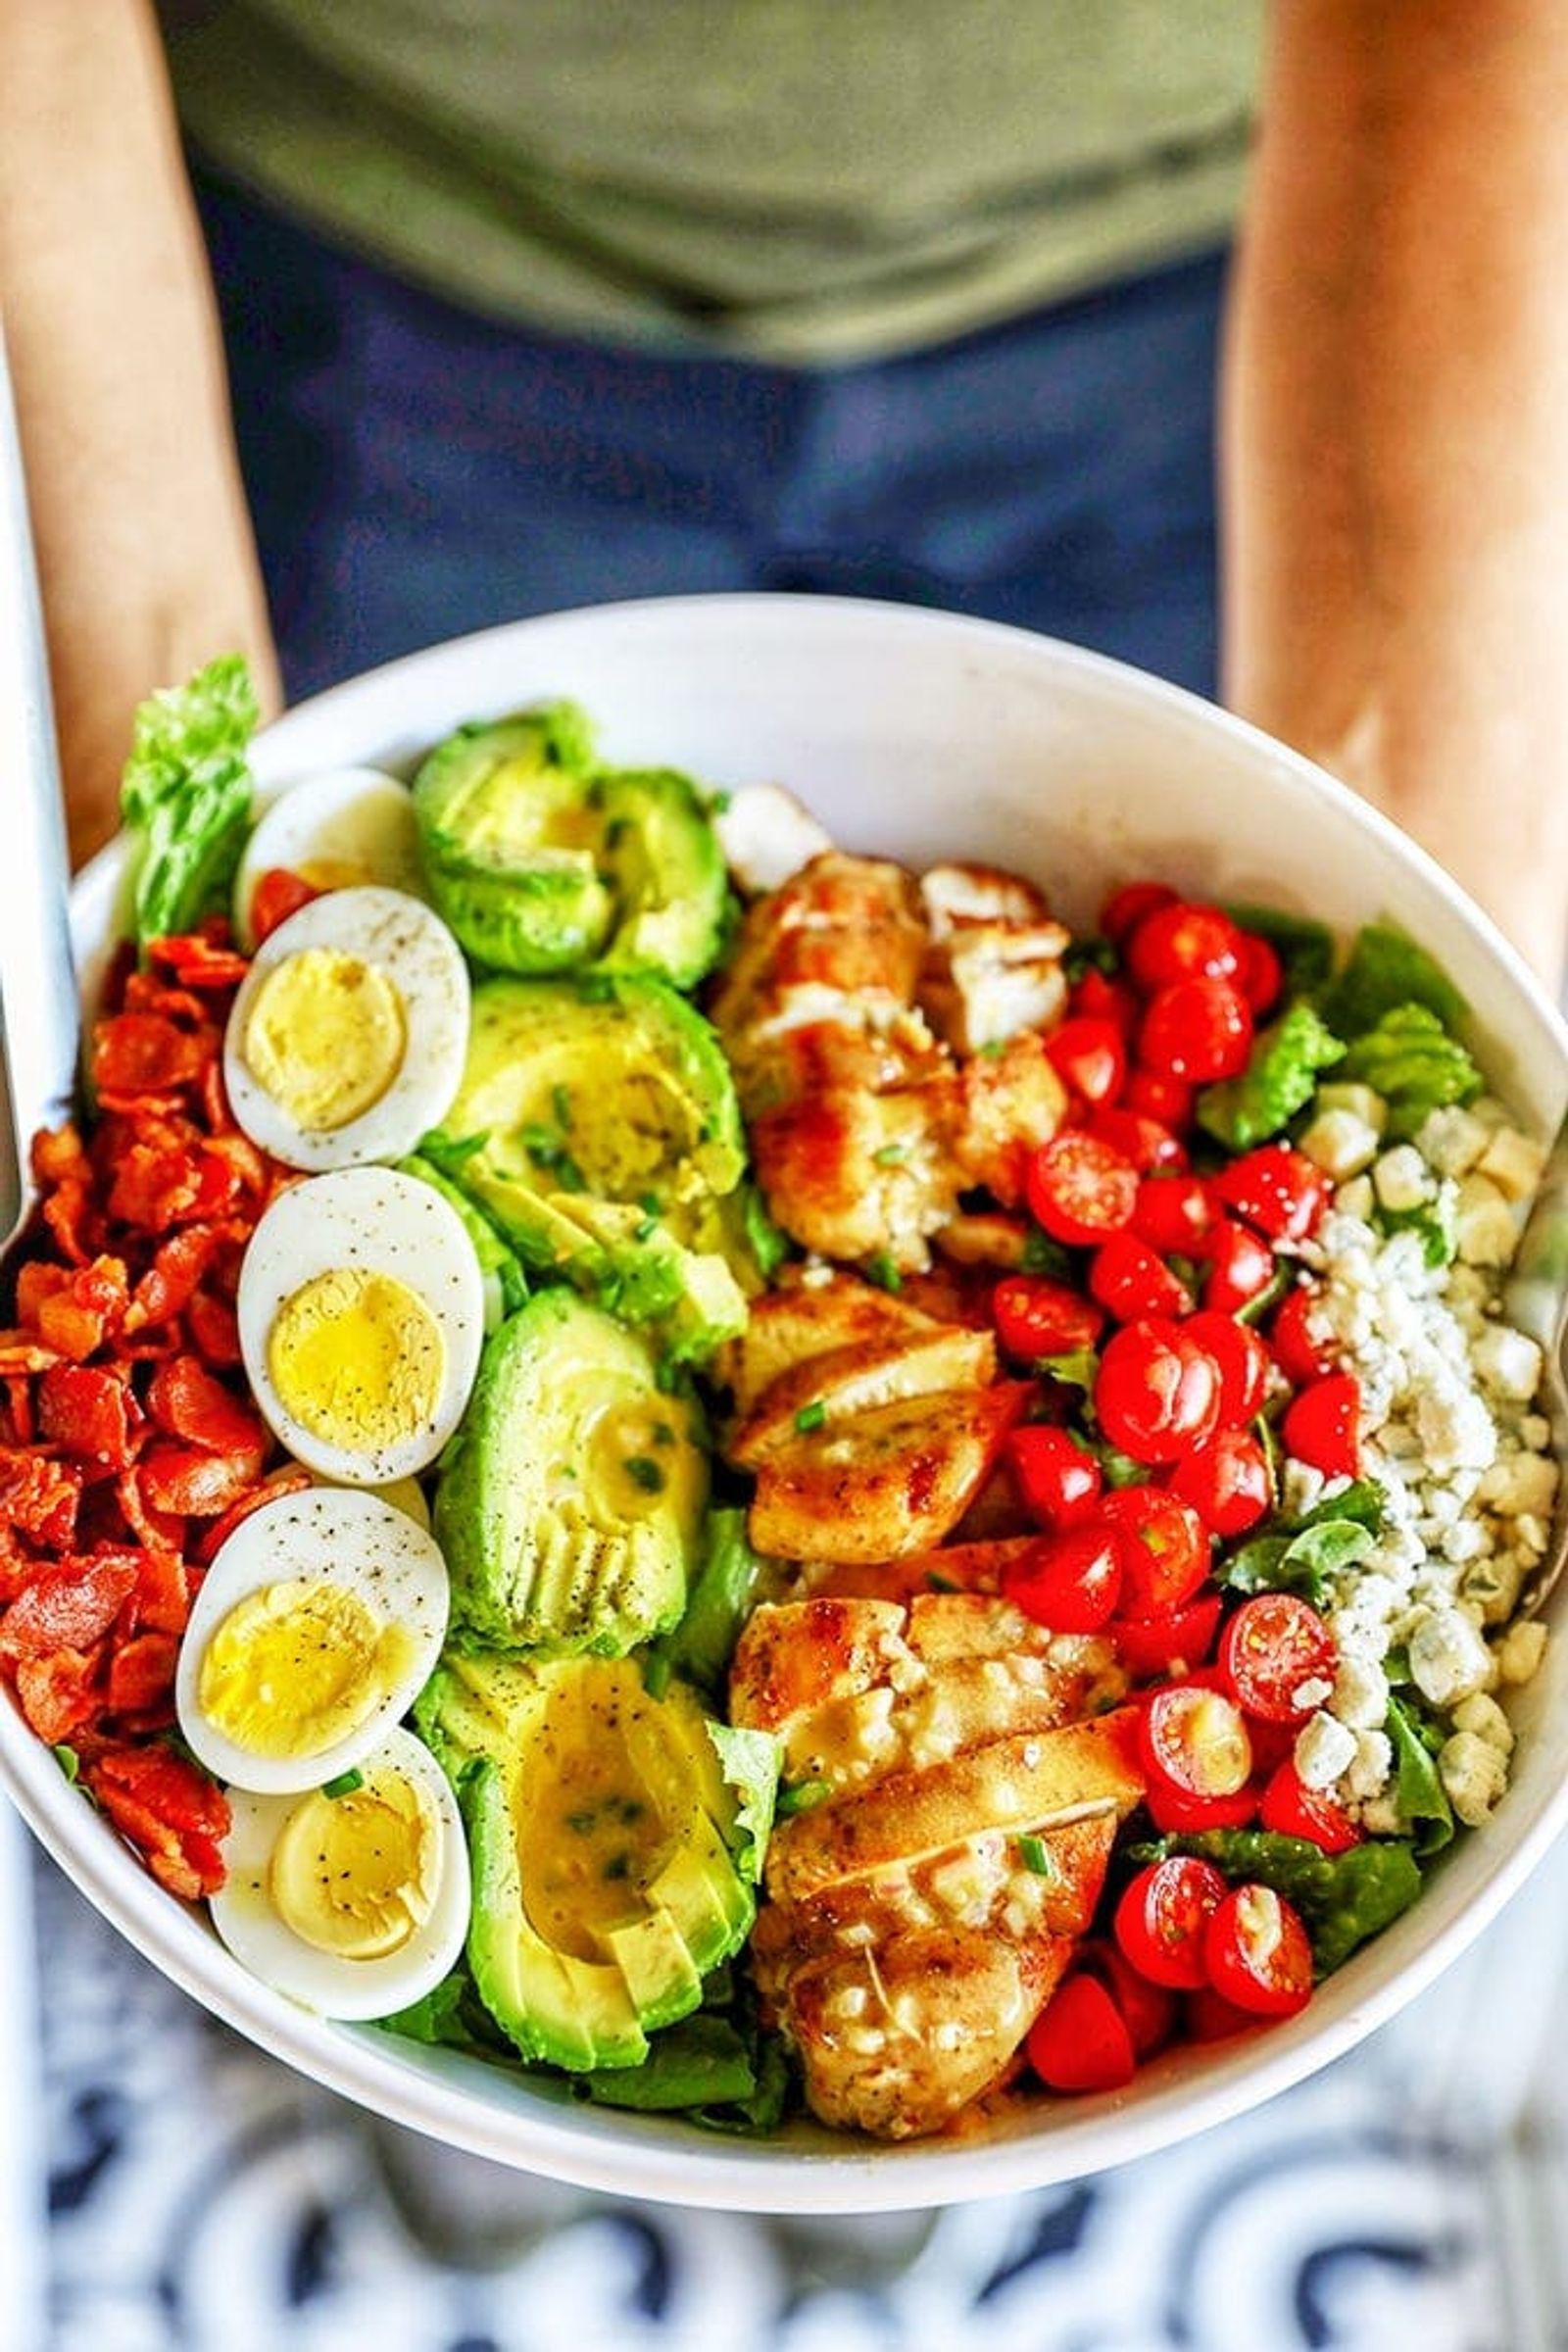 Use leftover chicken, pre-crumbled bacon, hard-boiled eggs, and your favorite dressing to quickly assemble a hearty lunch that<em> hardly </em>feels like a salad. (via <strong><a href="https://www.number-2-pencil.com/chicken-cobb-salad-recipe/">No. 2 Pencil</a></strong>)